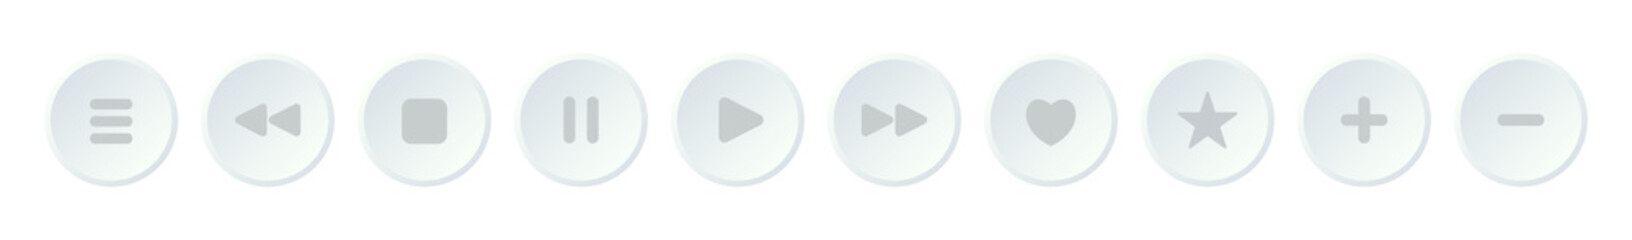 Media player vector buttons. UI icons set. Modern design. User interface elements for mobile app